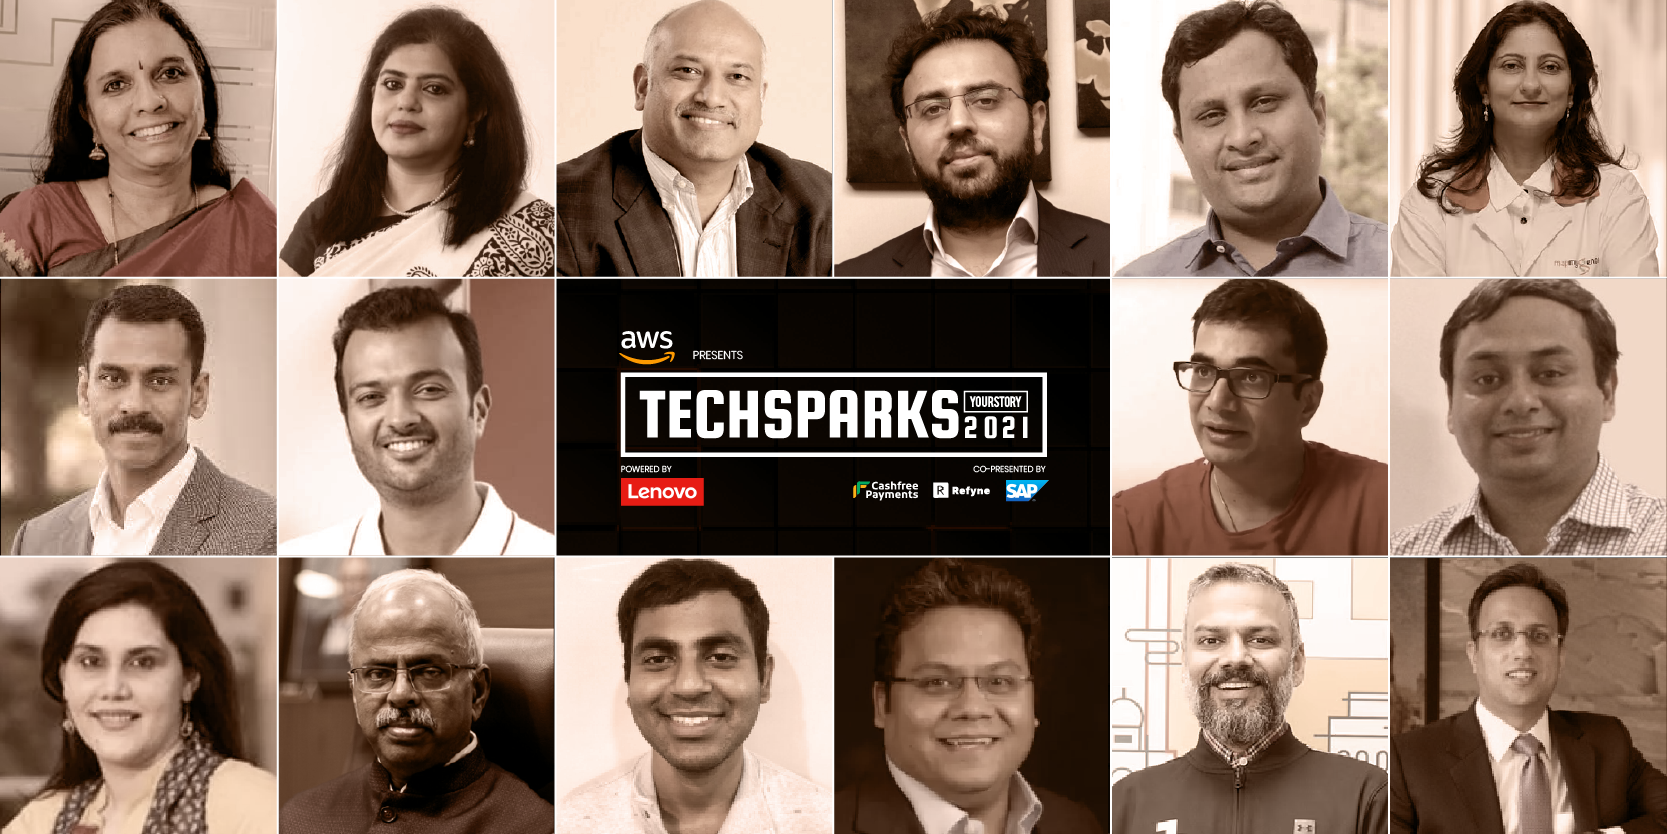 Here’s what is lined up on Day 5 of TechSparks 2021